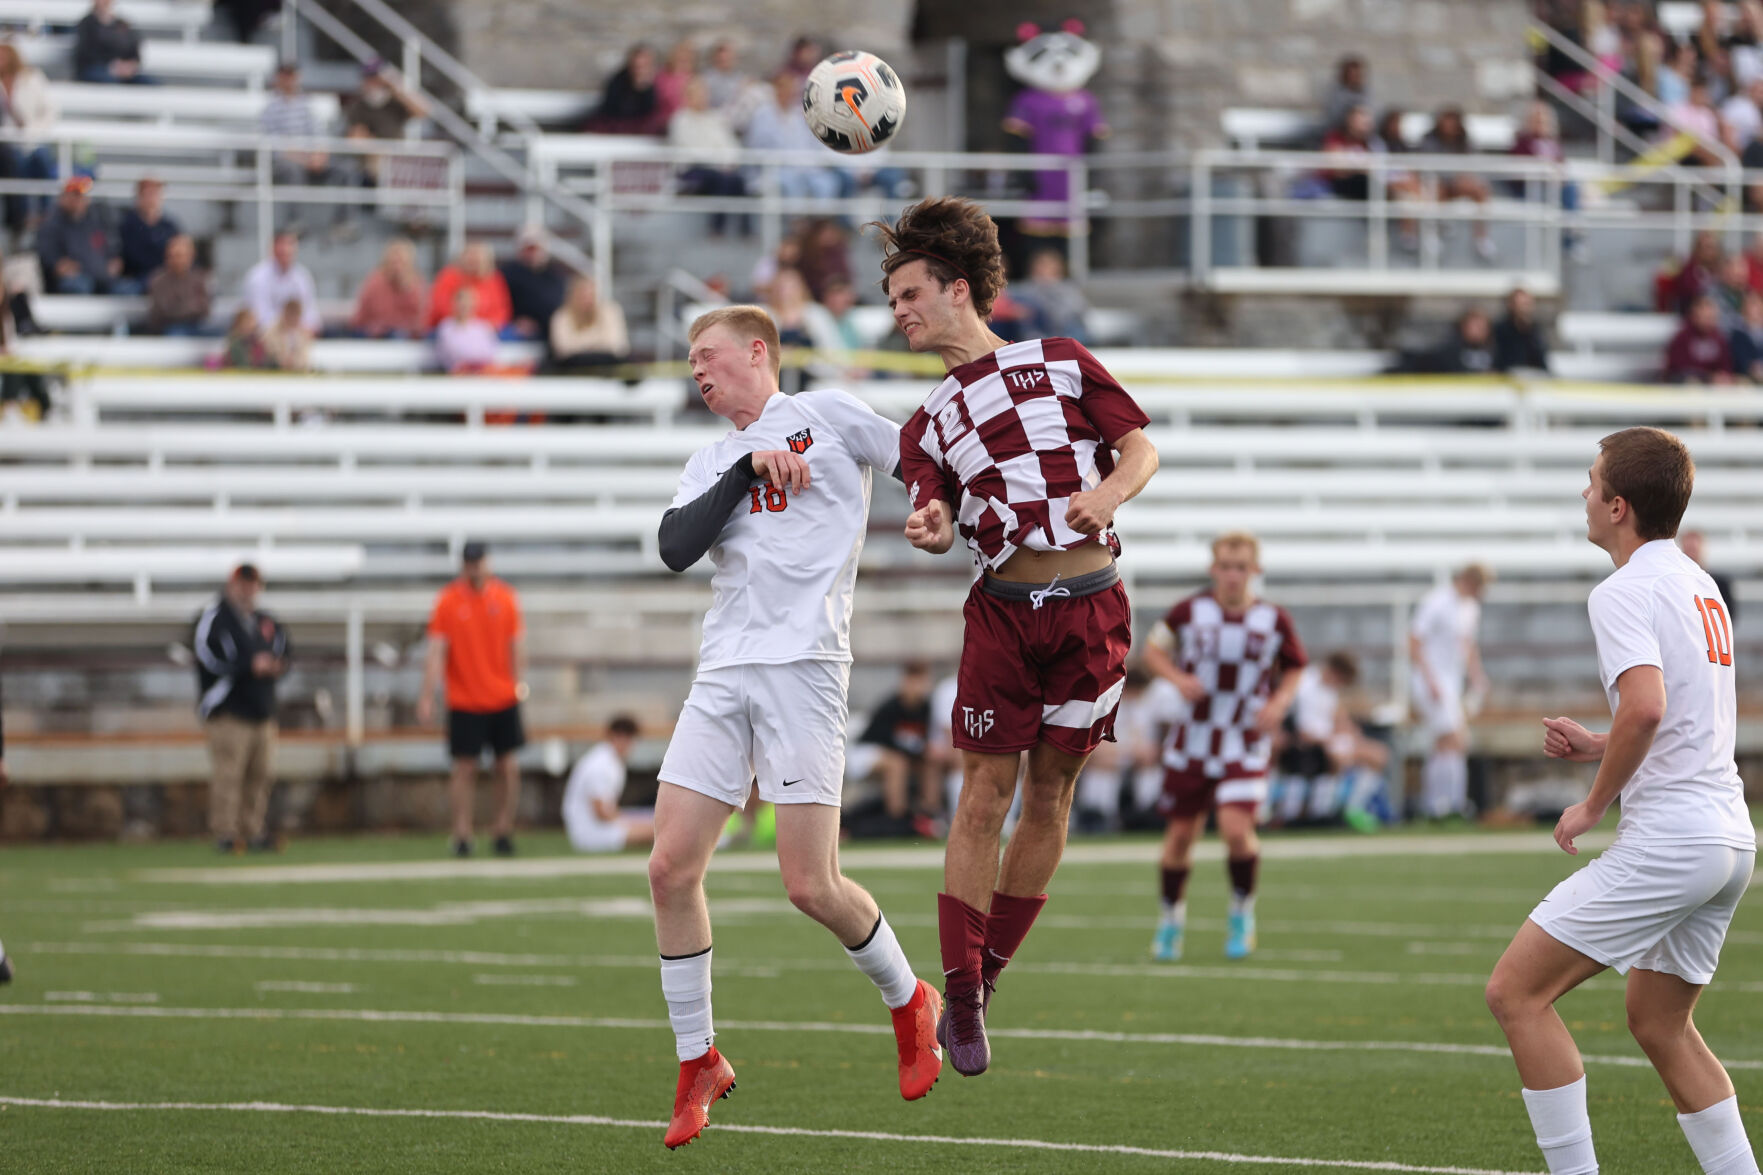 Exciting Victory: Tennessee High Dominates Virginia High 4-0 in Boys Soccer Clash